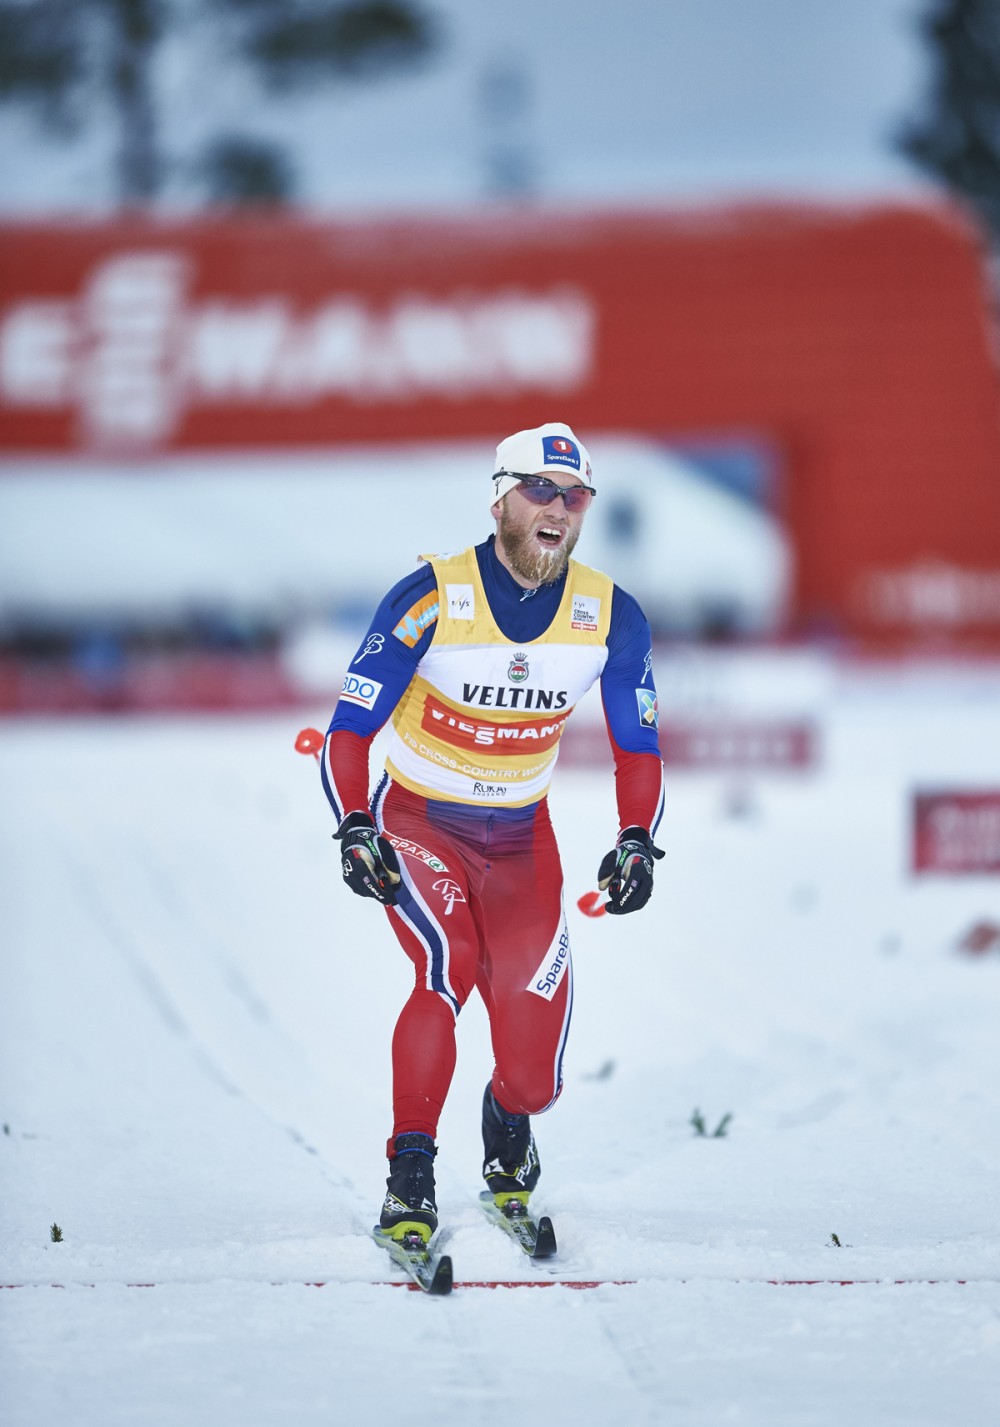 Sundby Clinches Ruka Triple with 44-Second Pursuit Win; Harvey 7th Overall